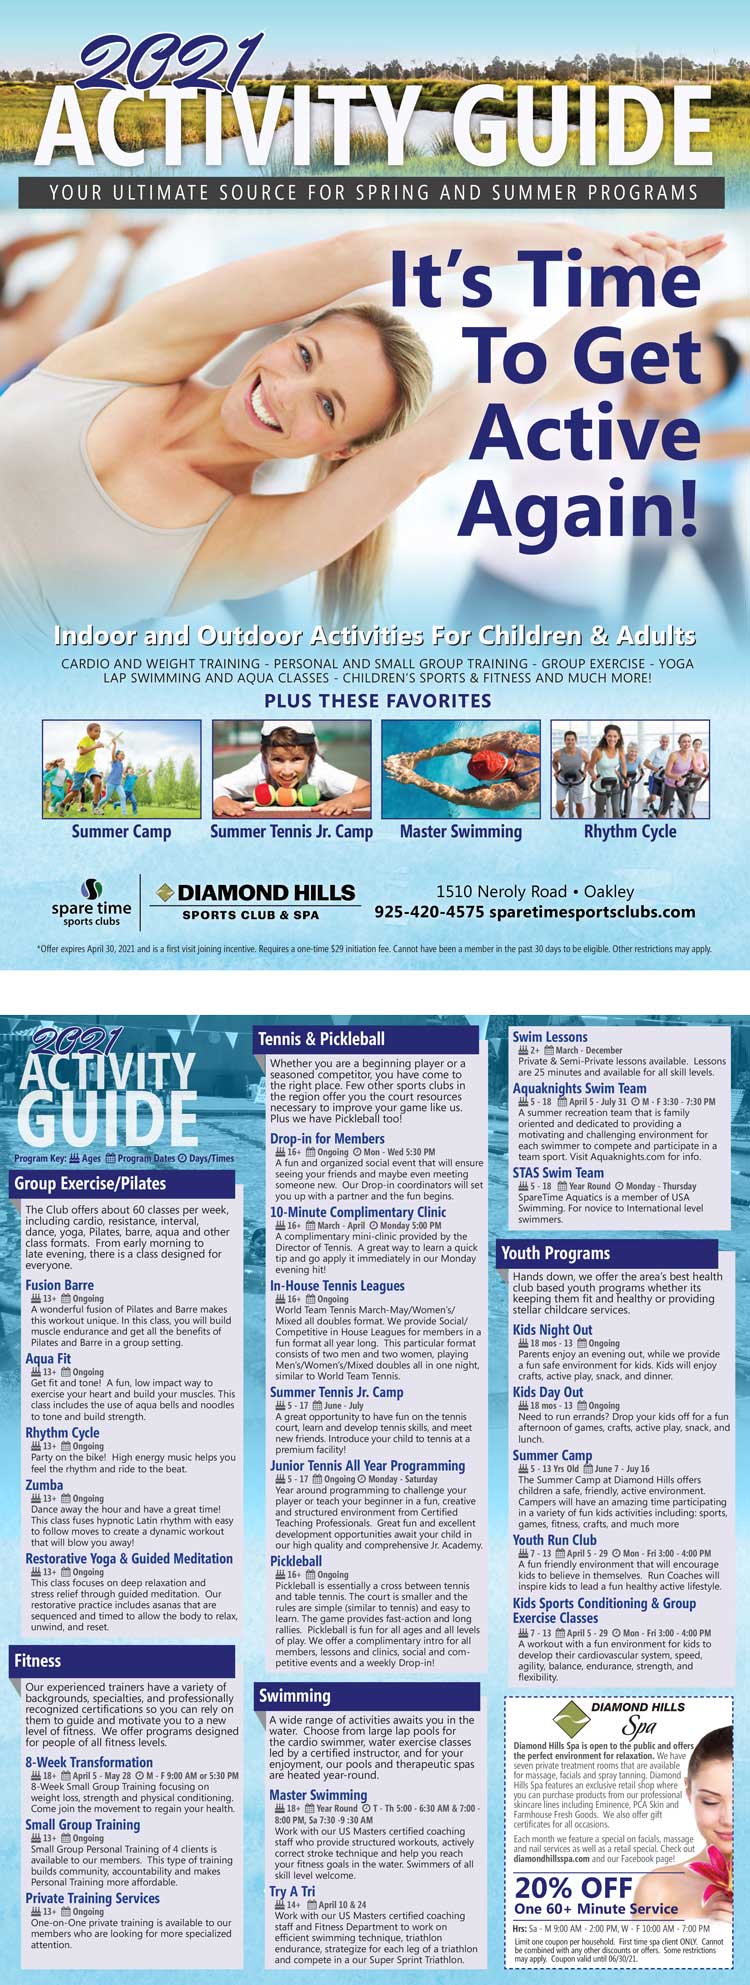 2021 DHSC Activity Guide